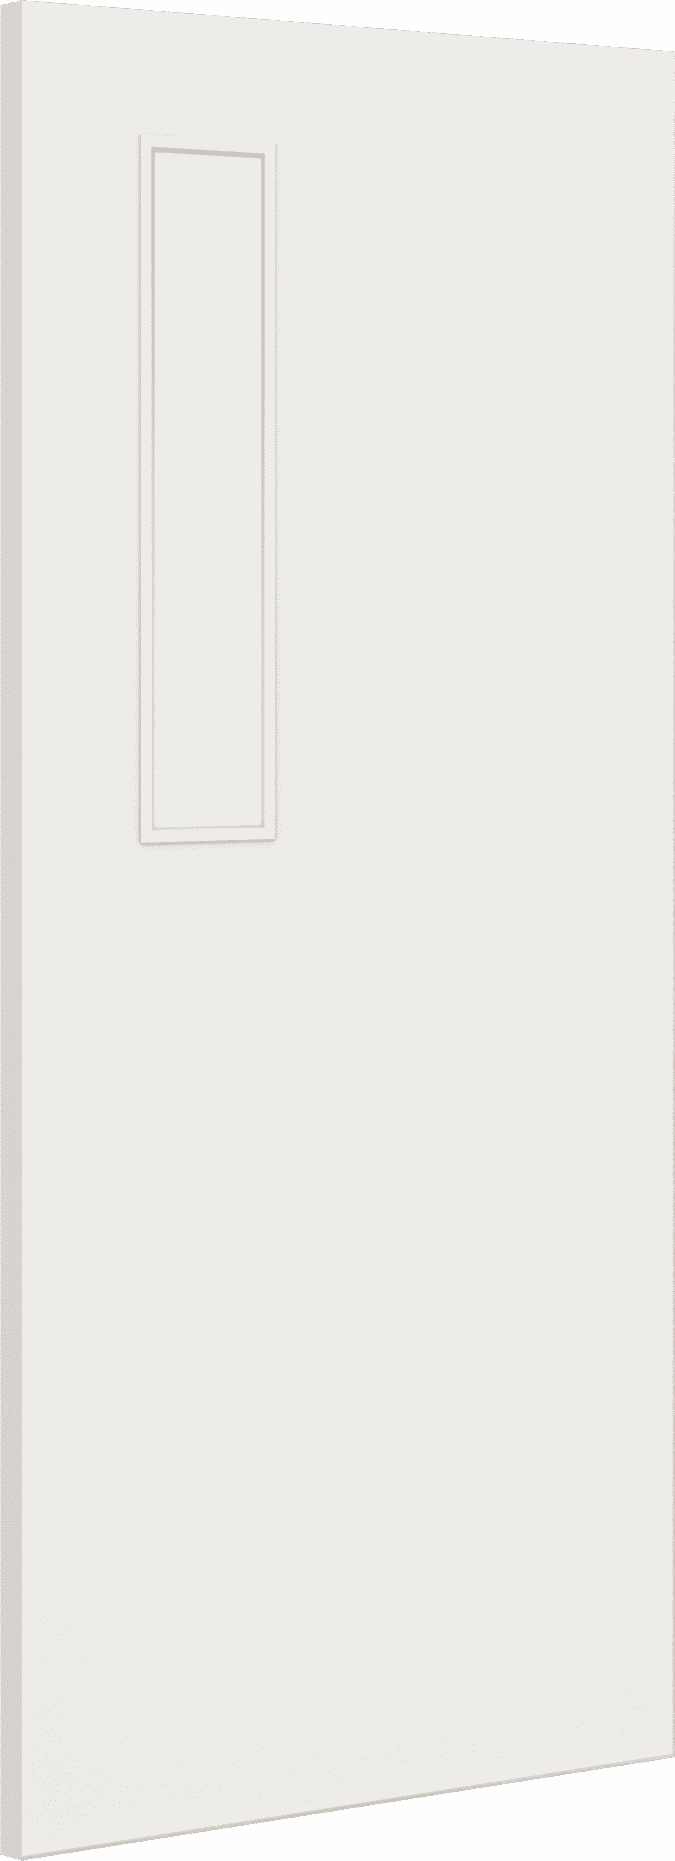 1981mm x 610mm x 44mm (24") Architectural Paint Grade White 08 Clear Glazed Fire Door Blank